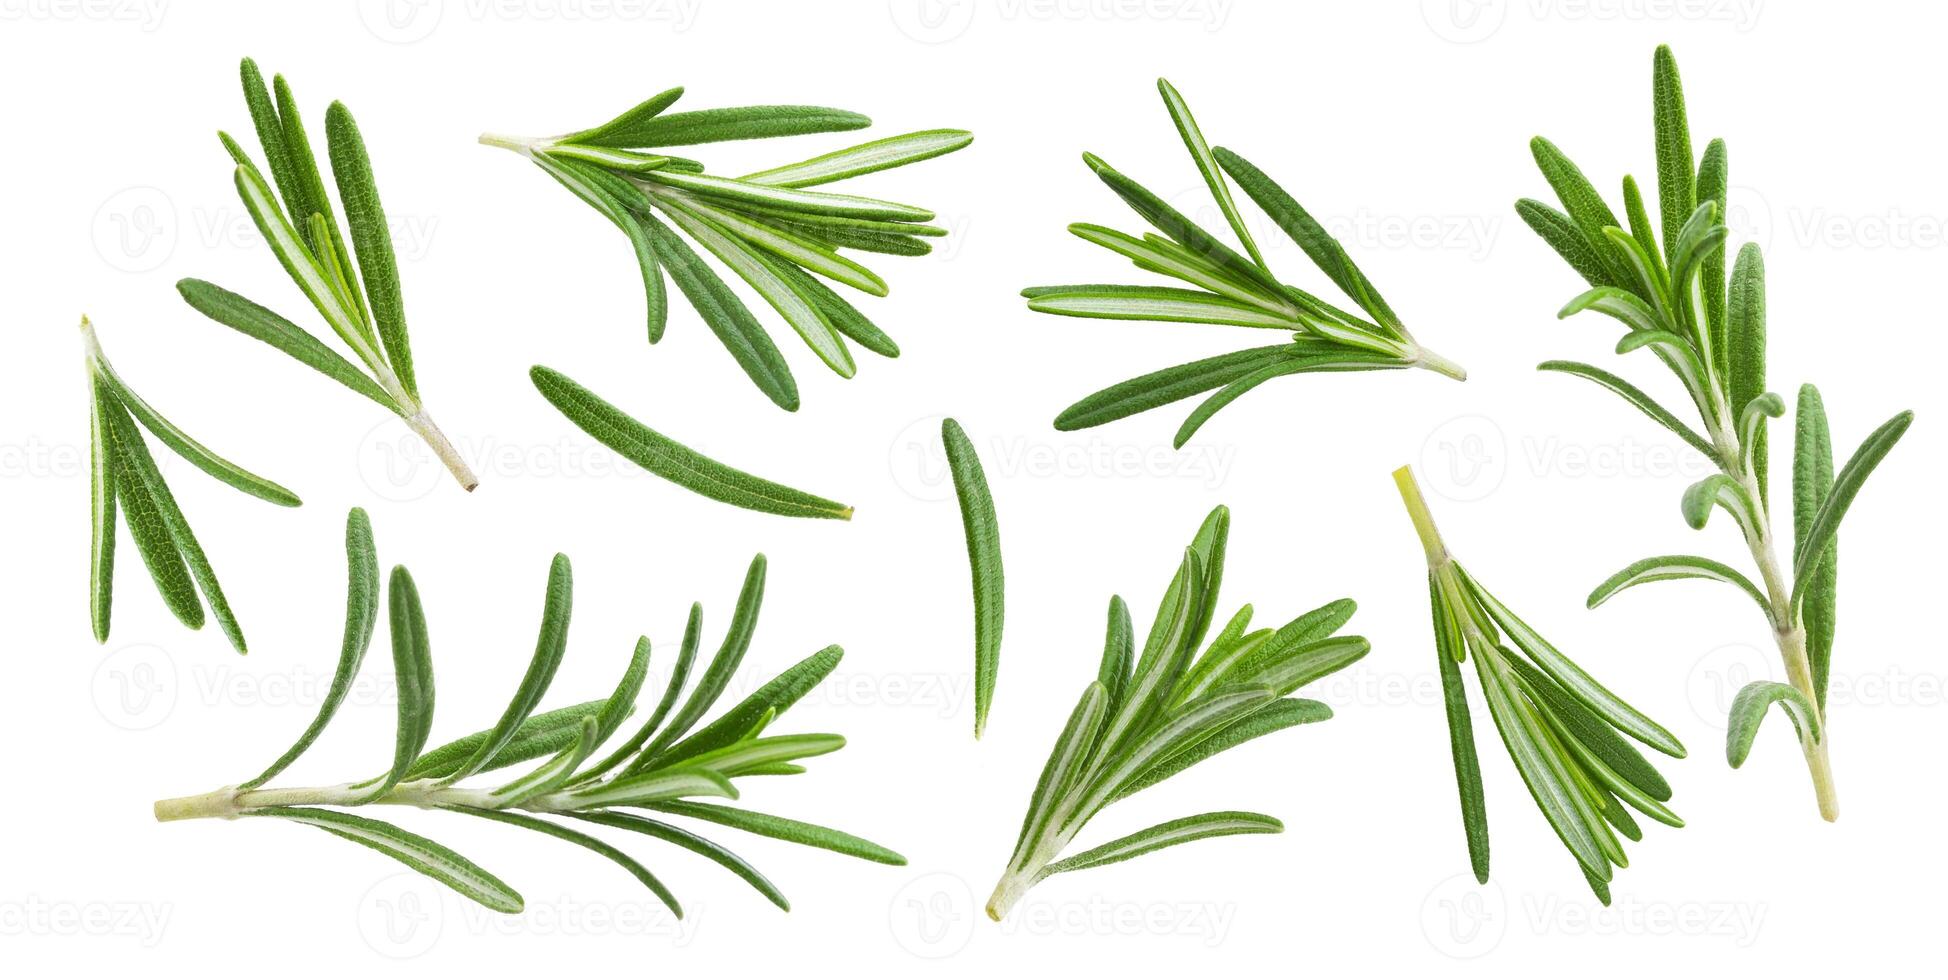 Rosemary twig and leaves isolated on white background with clipping path, collection photo